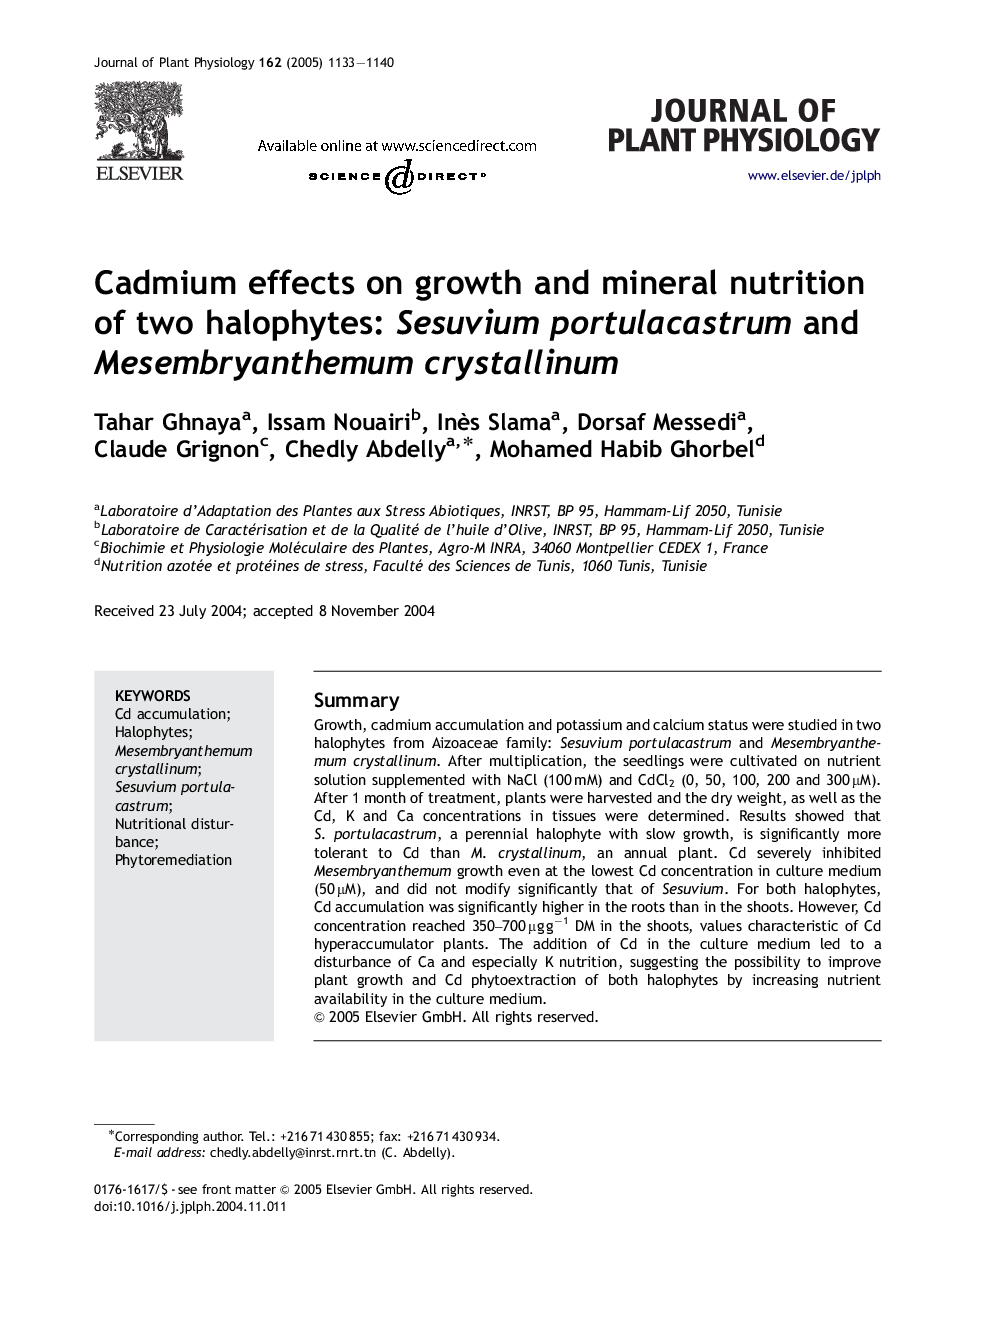 Cadmium effects on growth and mineral nutrition of two halophytes: Sesuvium portulacastrum and Mesembryanthemum crystallinum